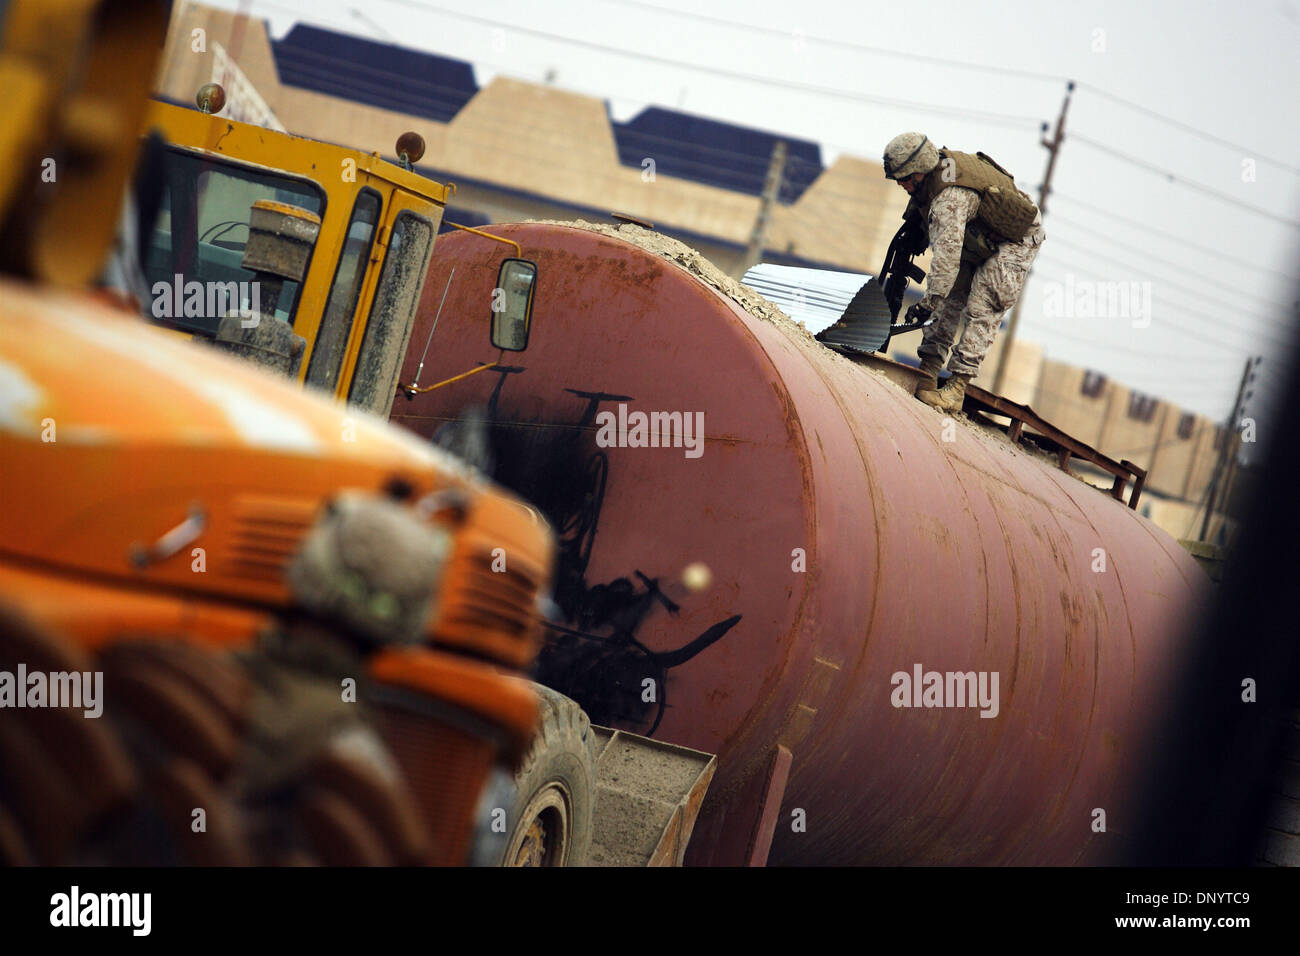 Feb 08, 2006; Al-Falujah, IRAQ; A marine from Weapons company 2nd marine division, 2nd battalion, 6th marine regiment, RCT-8, 4th platoon (callsign Black Label)  searches a tanker truck in the Iraqi city of Al-Falujah. Mandatory Credit: Photo by Toby Morris/ZUMA Press. (©) Copyright 2006 by Toby Morris Stock Photo